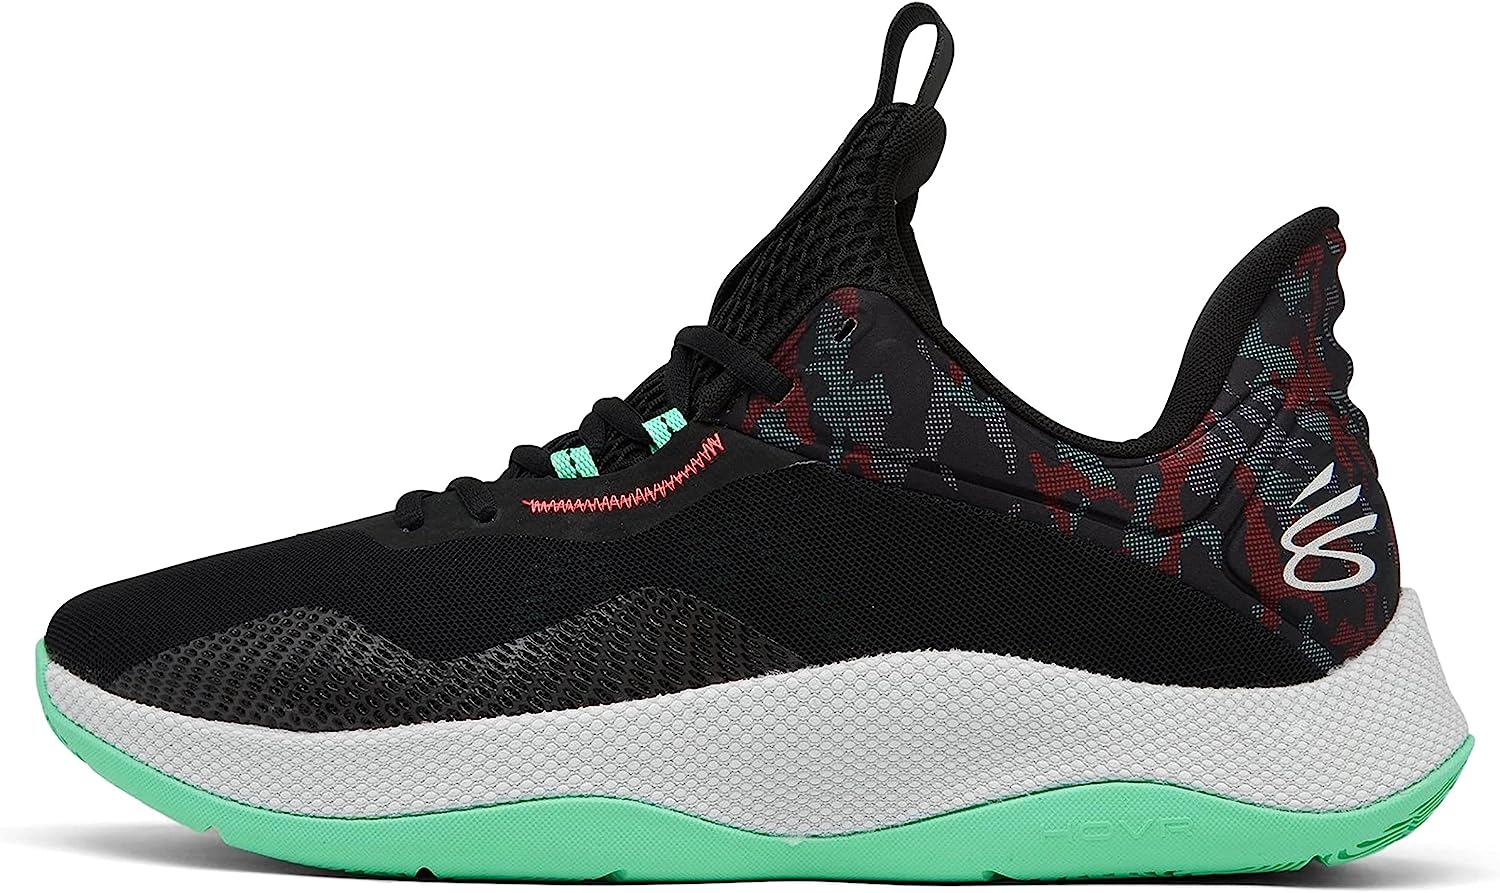 Under Armour Unisex Curry HOVR Splash 2 Basketball Shoes